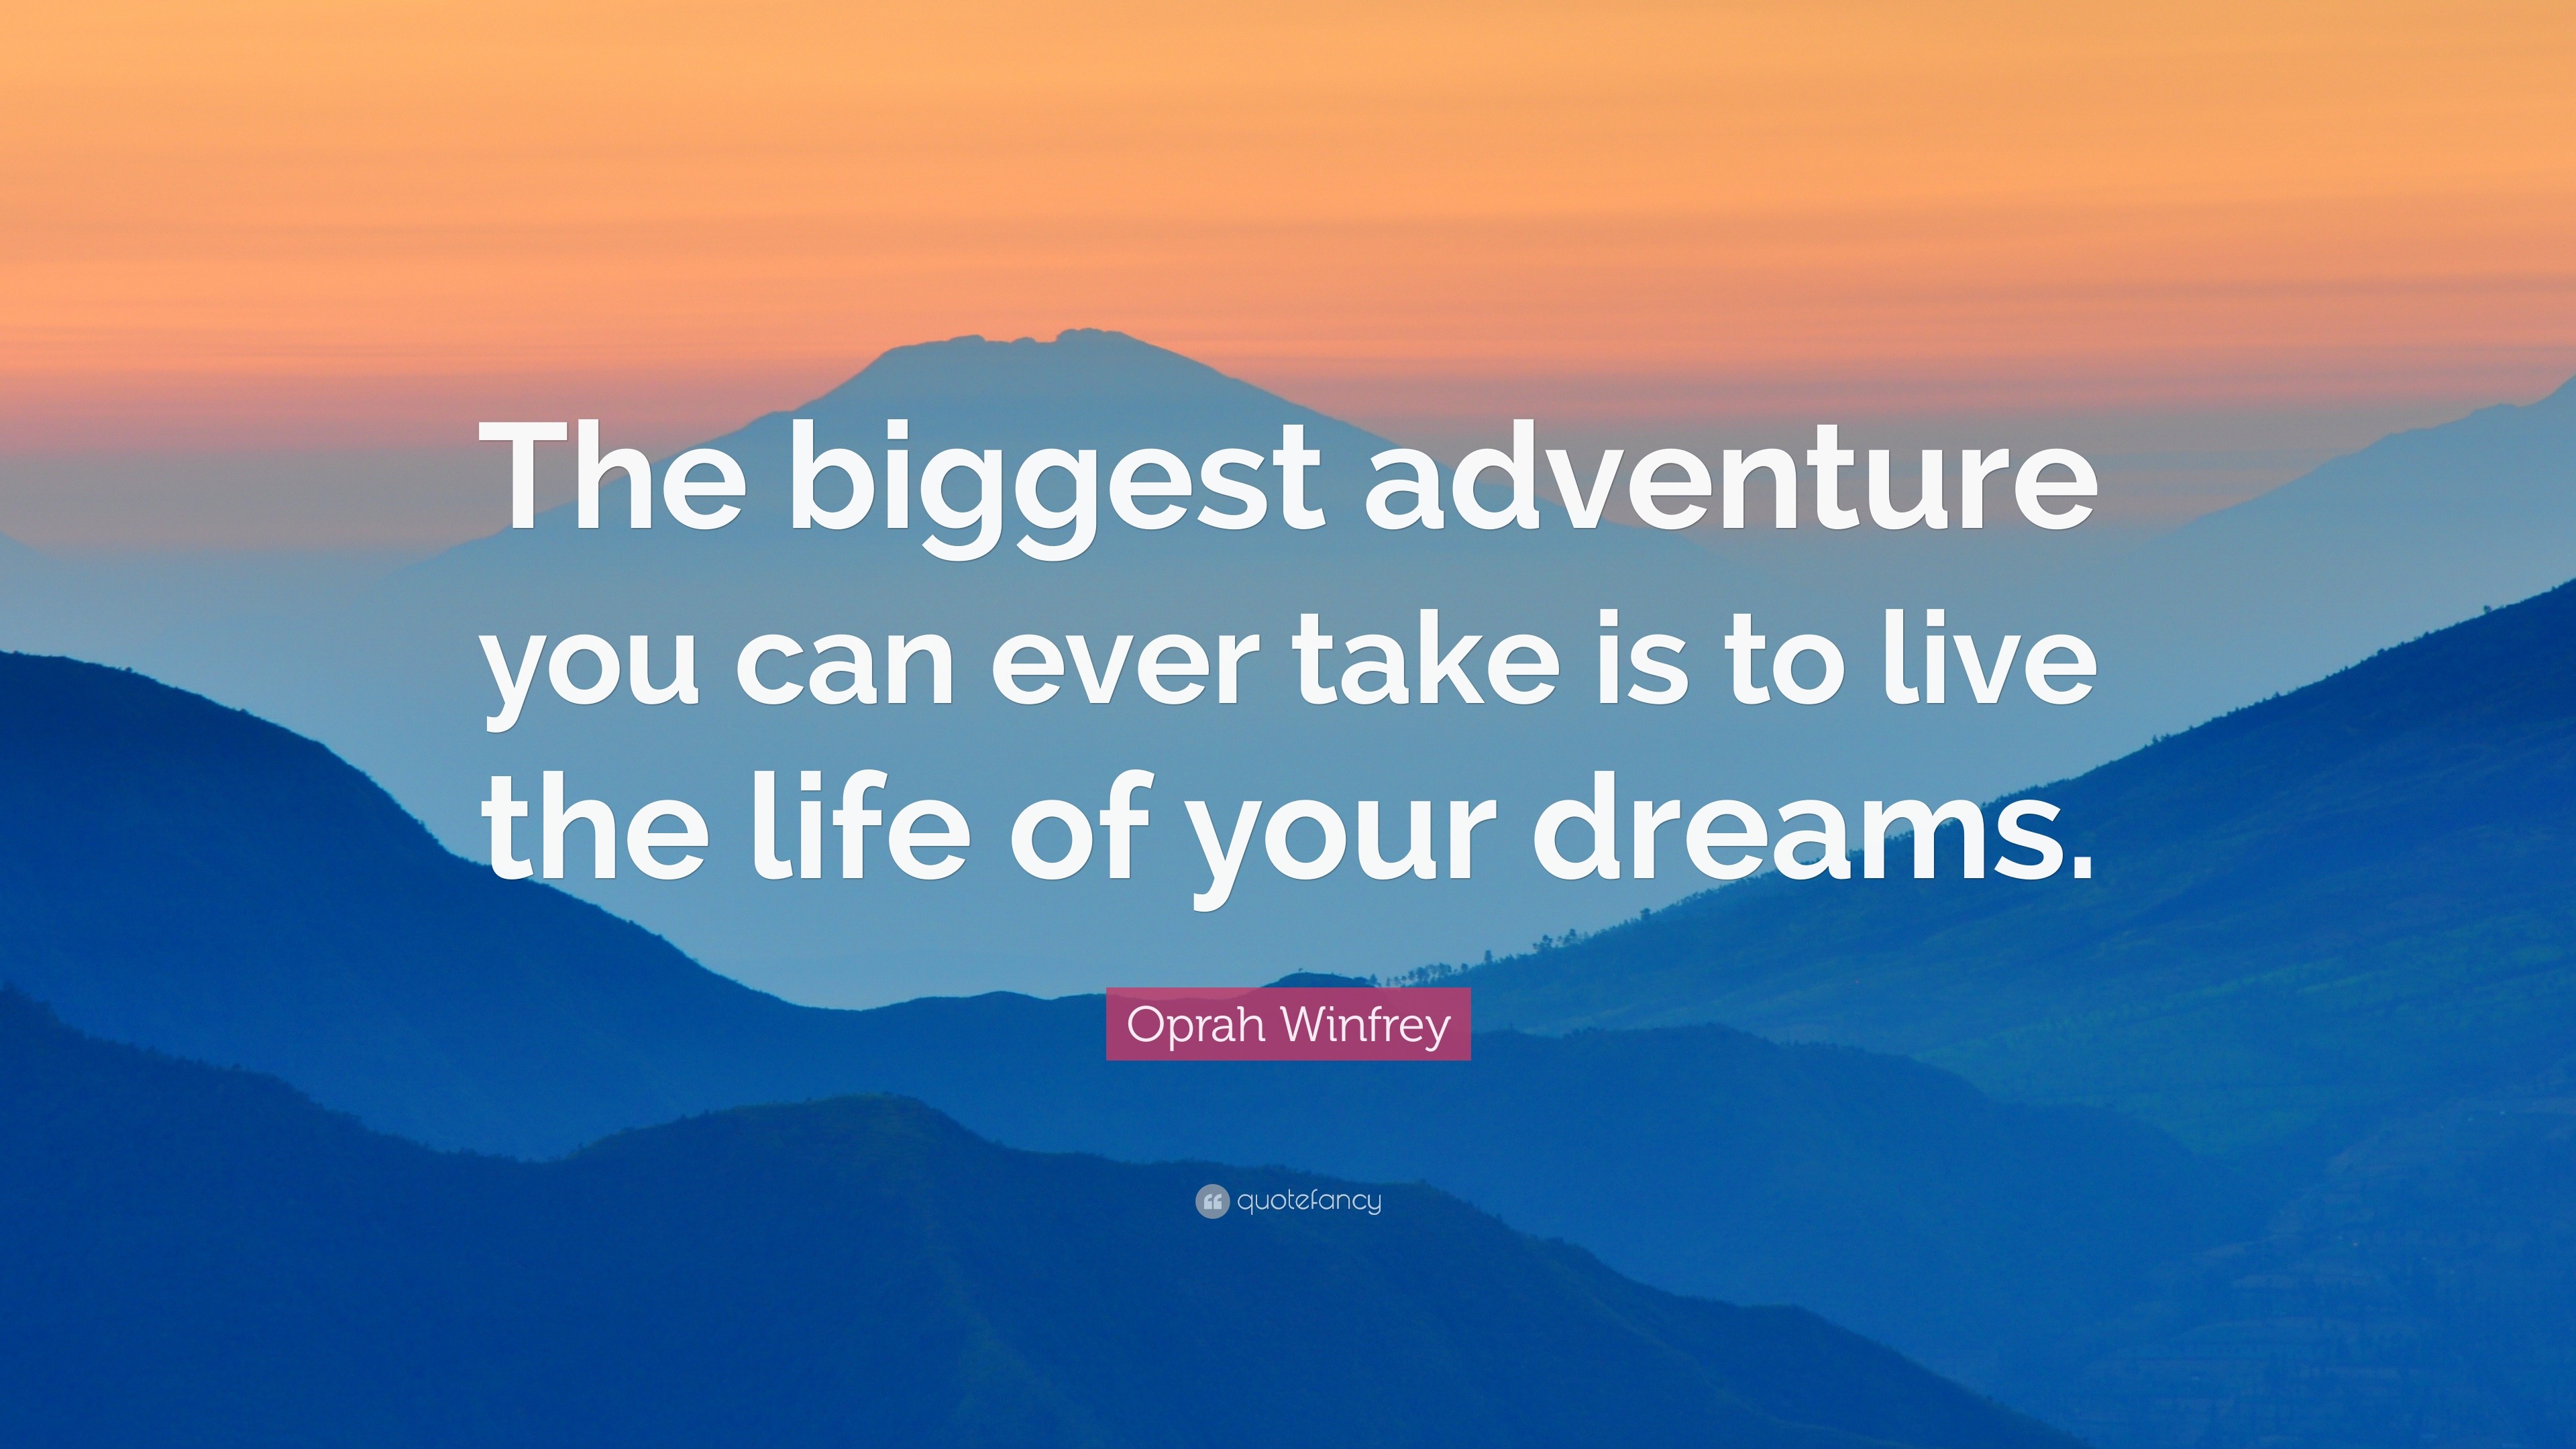 oprah-winfrey-quote-the-biggest-adventure-you-can-ever-take-is-to